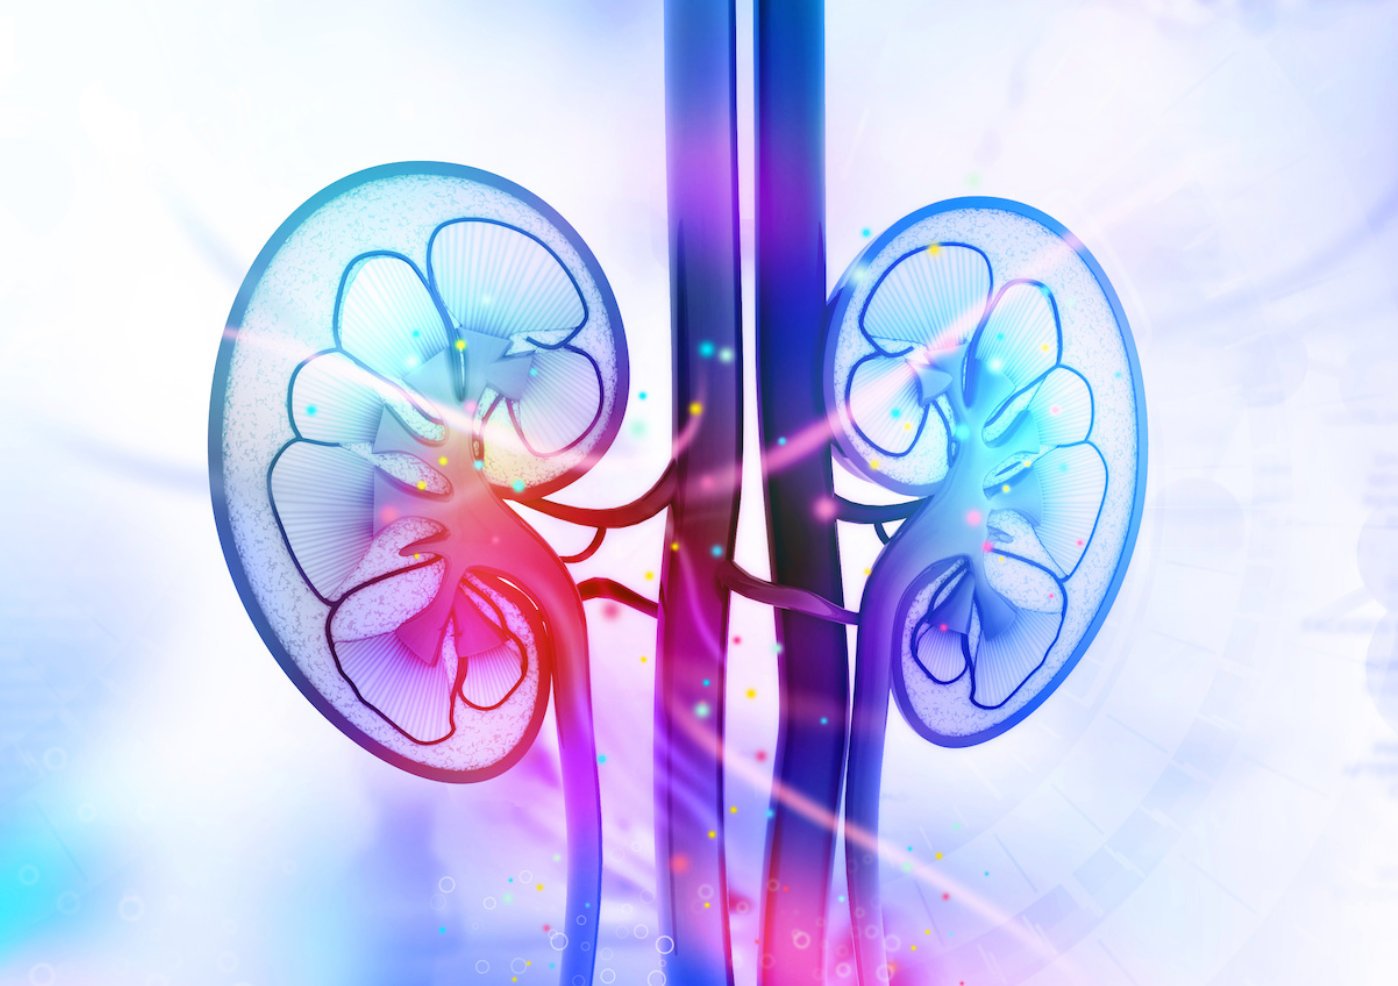 FDA Panel Finds Benefit of Daprodustat Outweighs Risk for Adult Dialysis Patients with Anemia of Chronic Kidney Disease